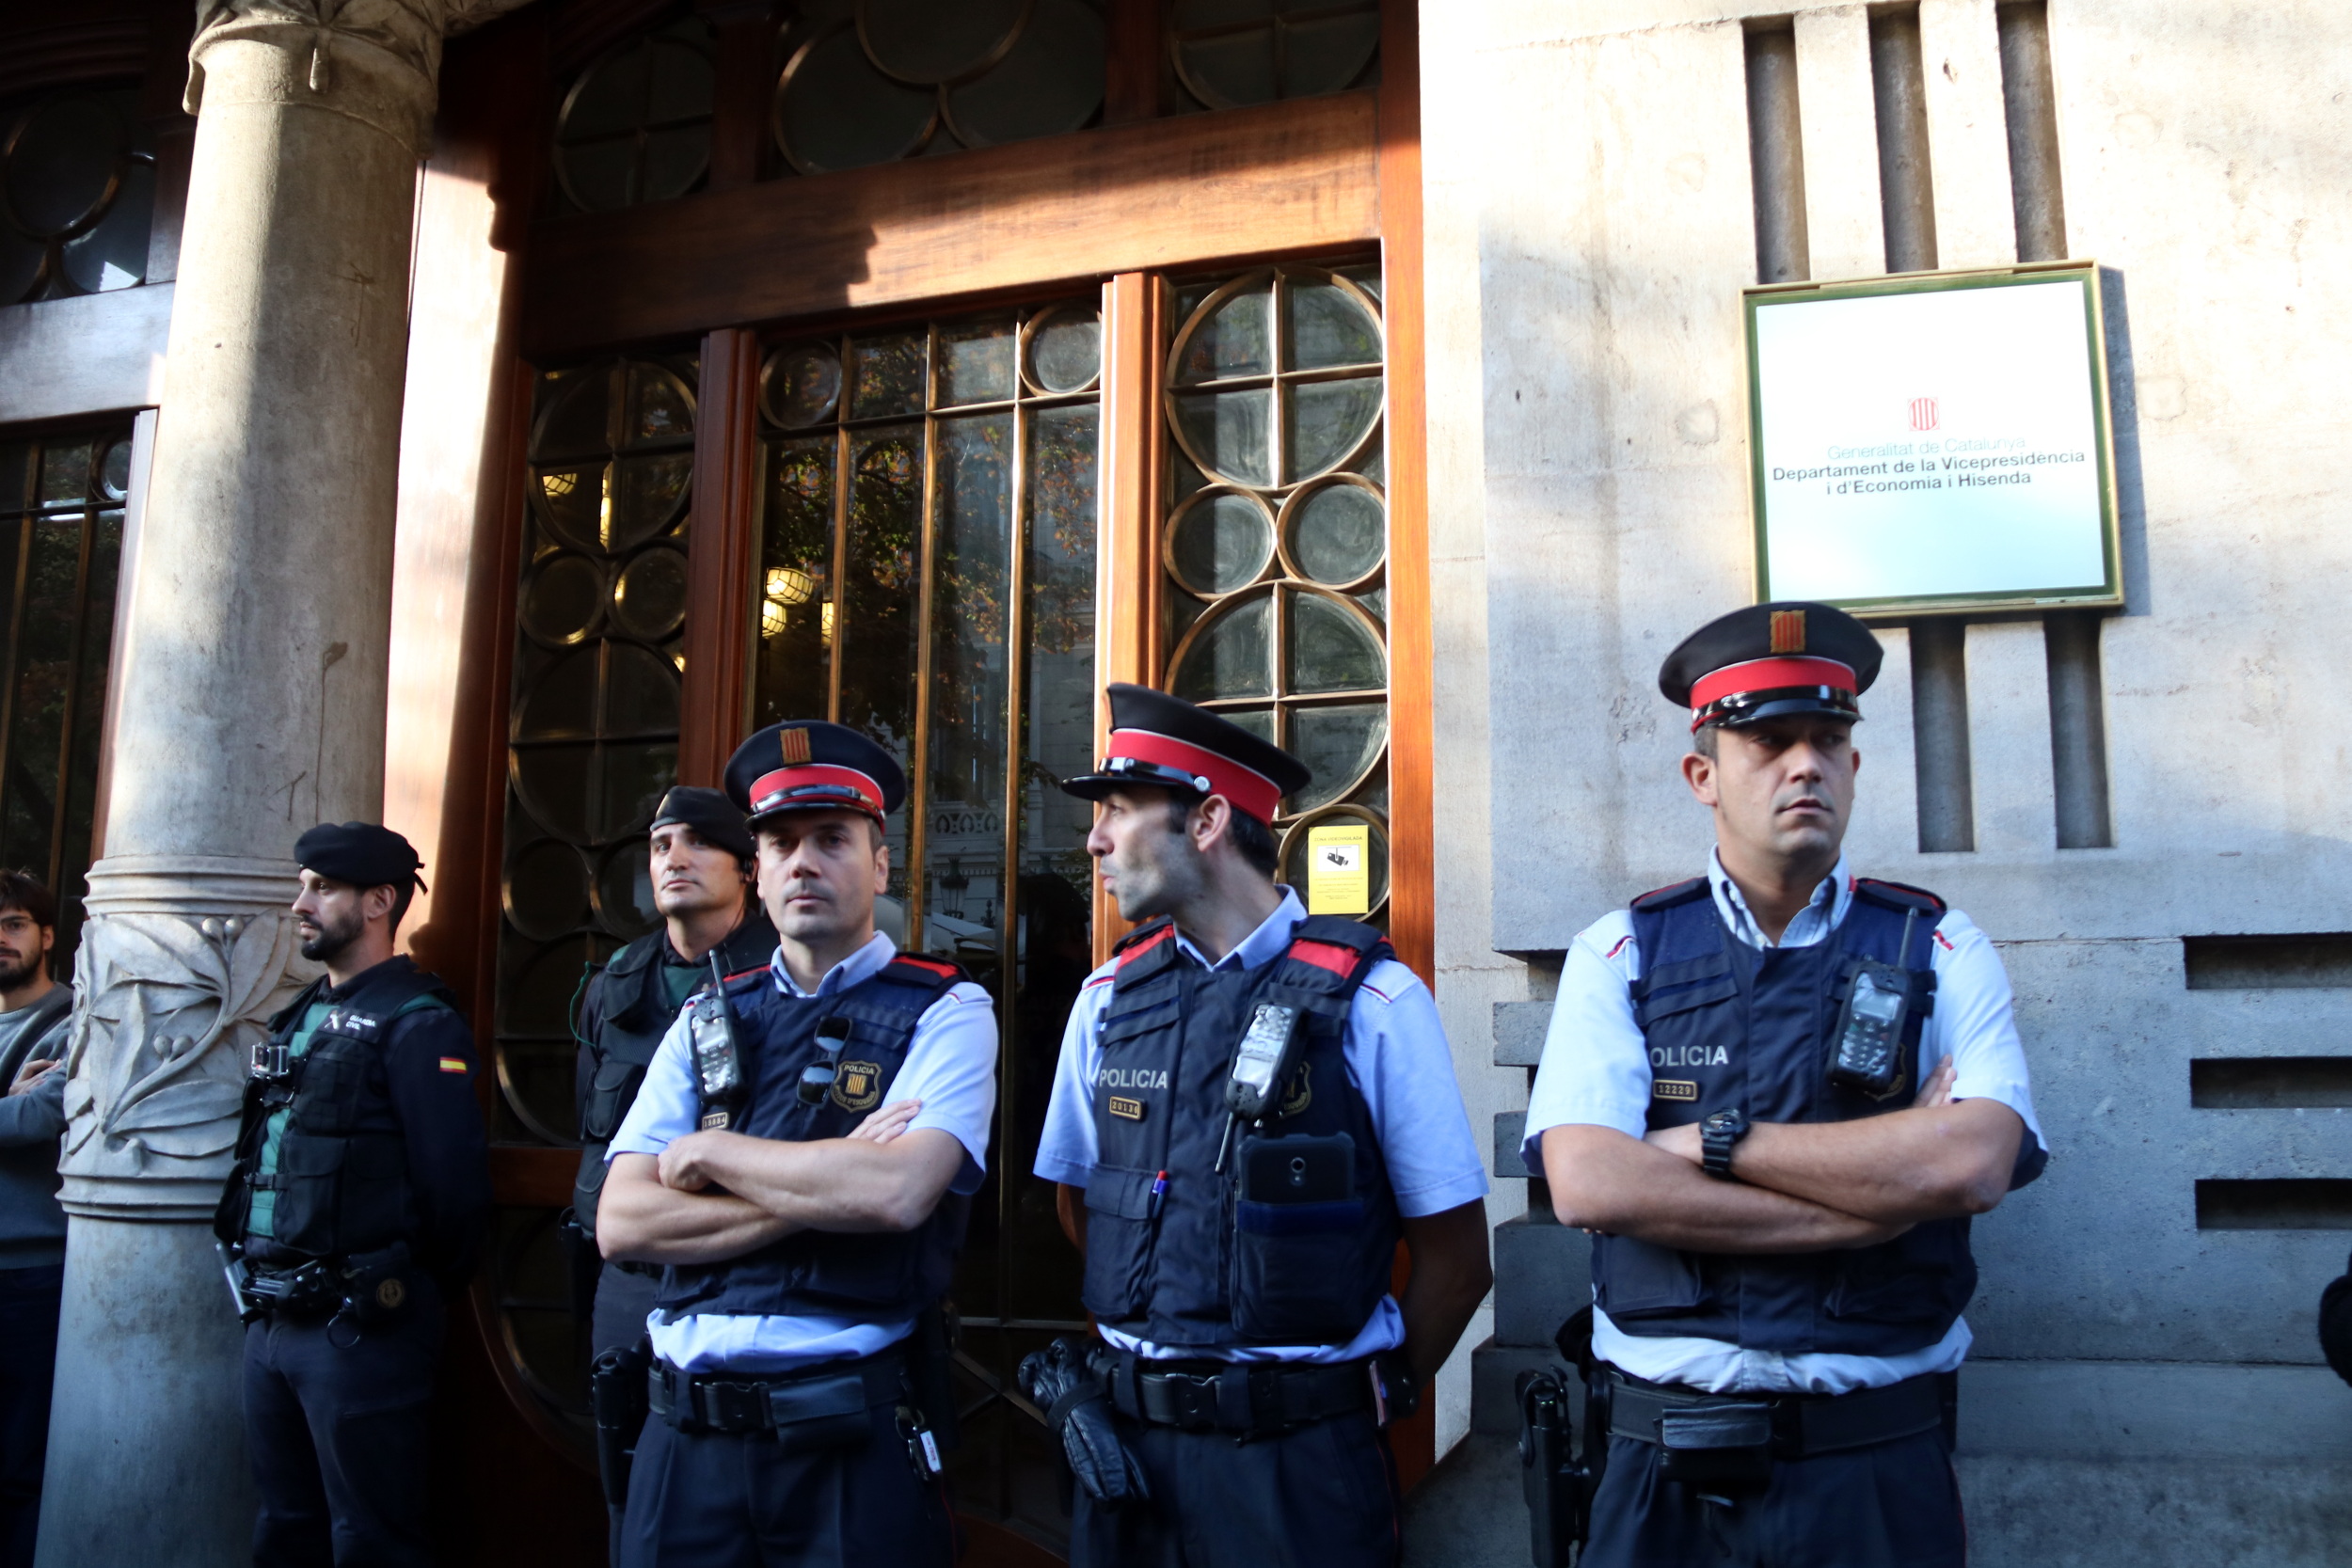 Some Catalan and Spanish police officers guarding Catalonia's department of Economy on Wednesday